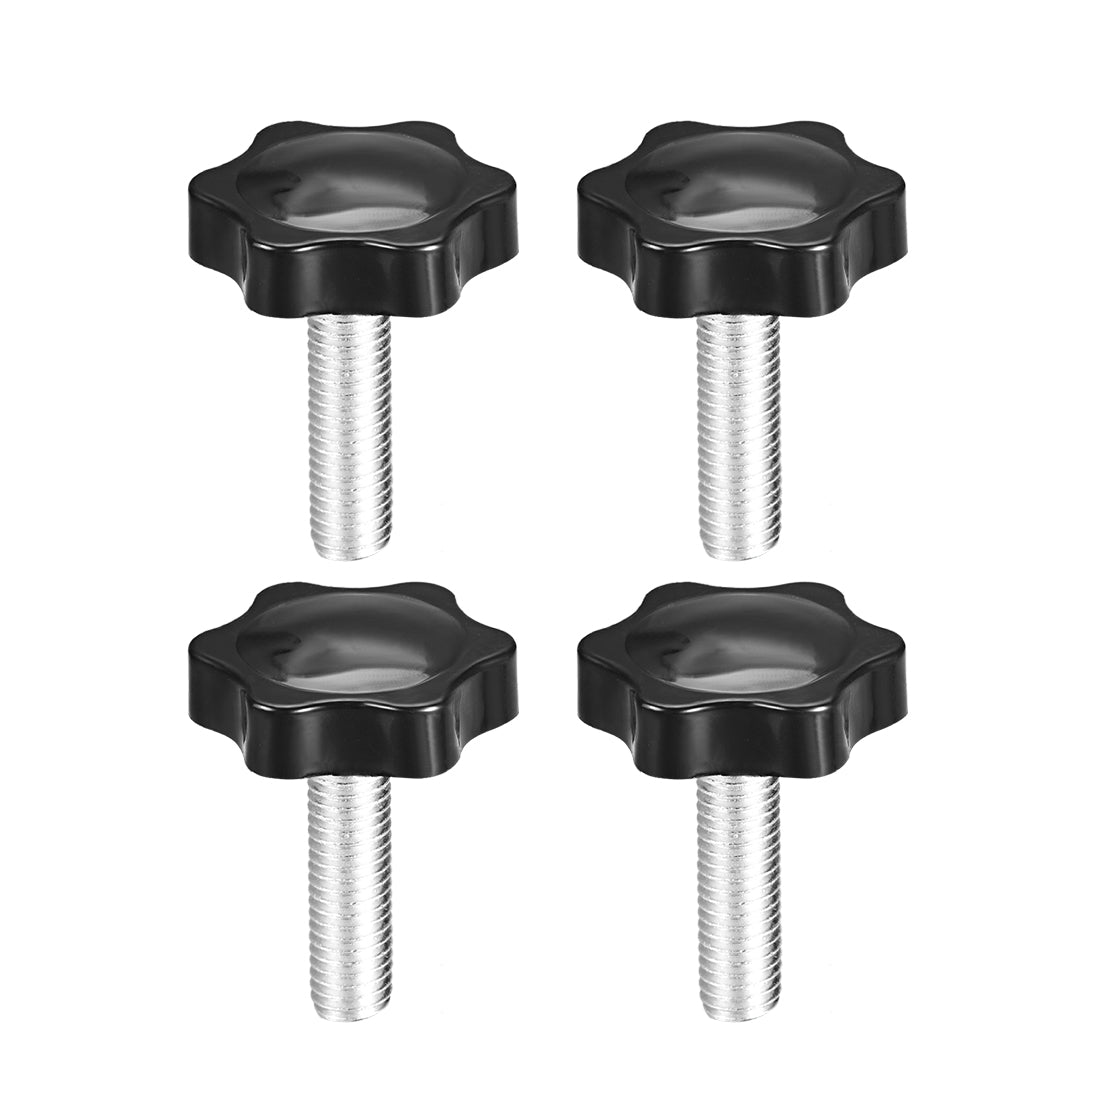 uxcell Uxcell Clamping Screw Knob Plum Hex Shaped Grips Star Knob Male Thread, 4pcs